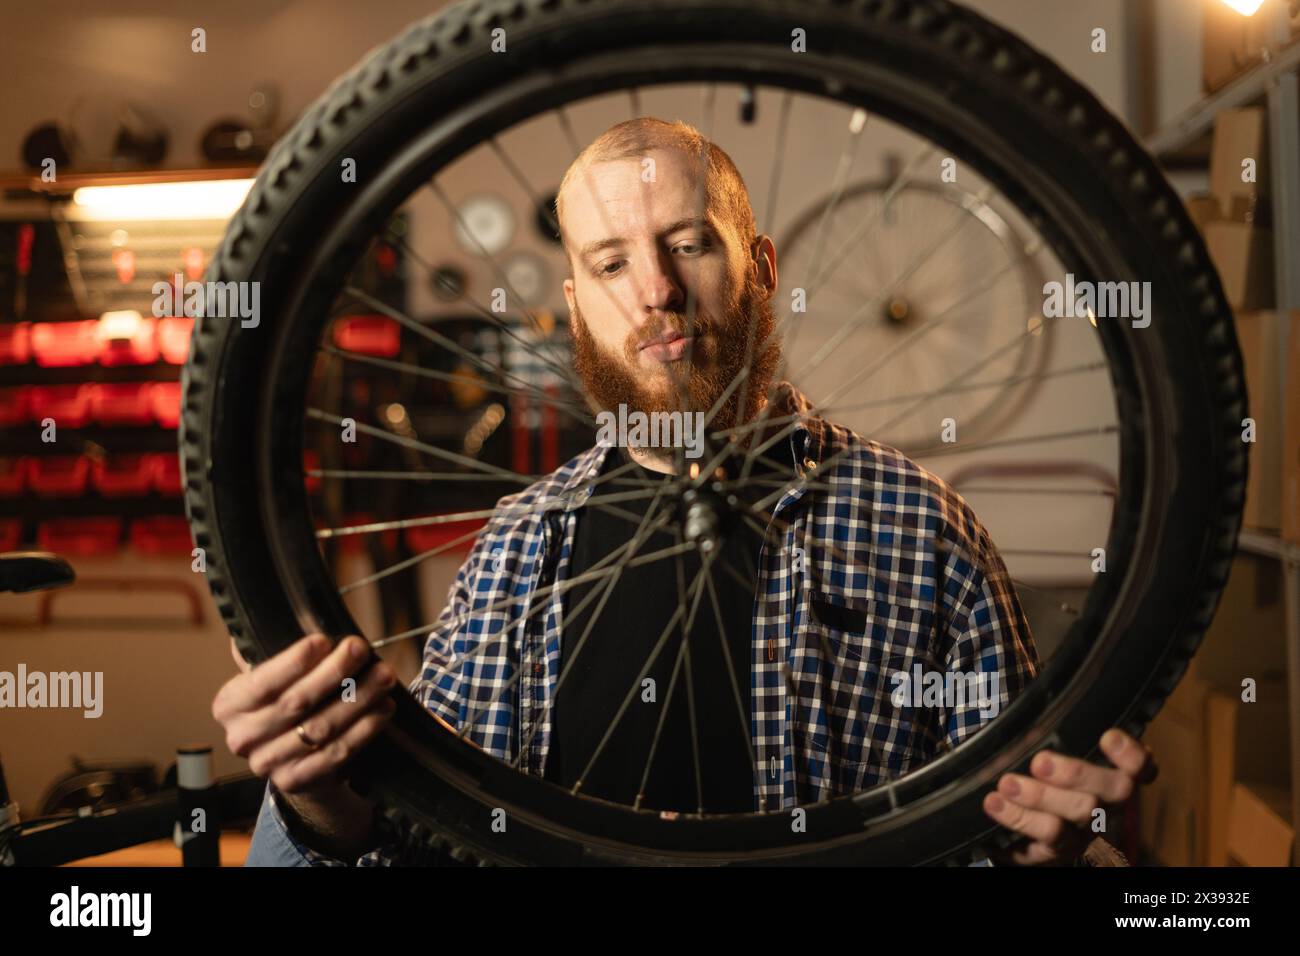 Bearded man standing alone in his workshop or garage and repairing a bicycle wheel. Stock Photo